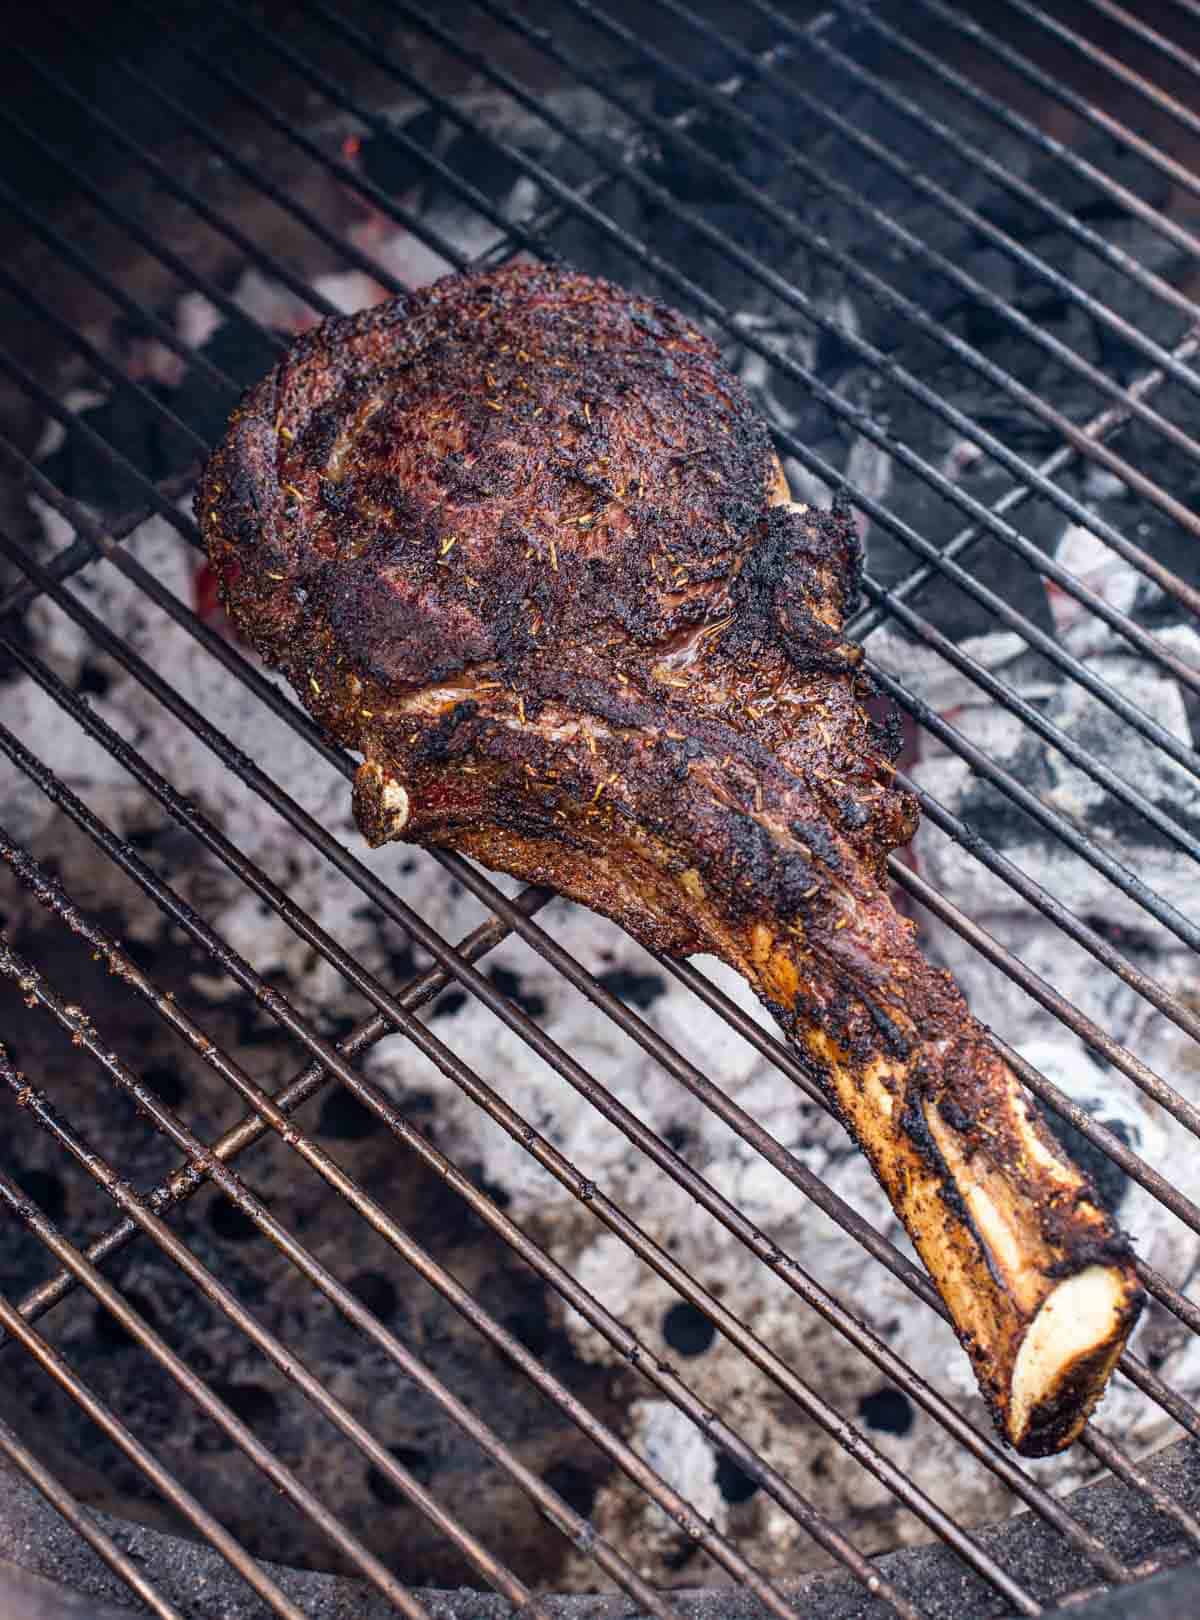 Grilled Tomahawk steak over indirect heat.